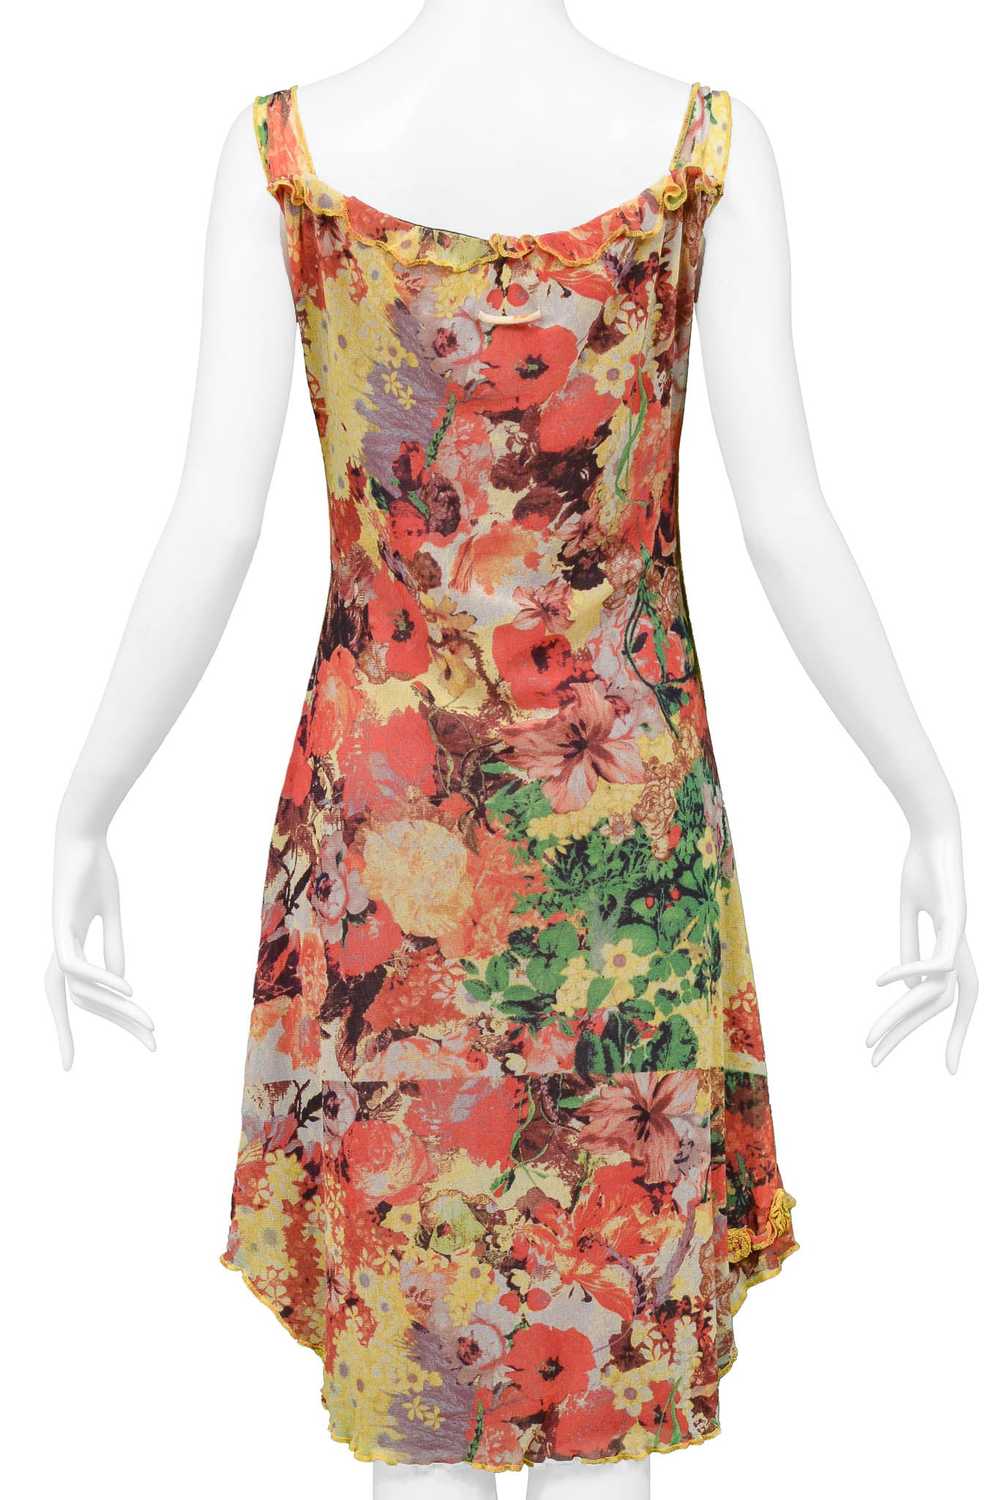 JEAN PAUL GAULTIER FLORAL PRINT MESH DRESS WITH P… - image 6